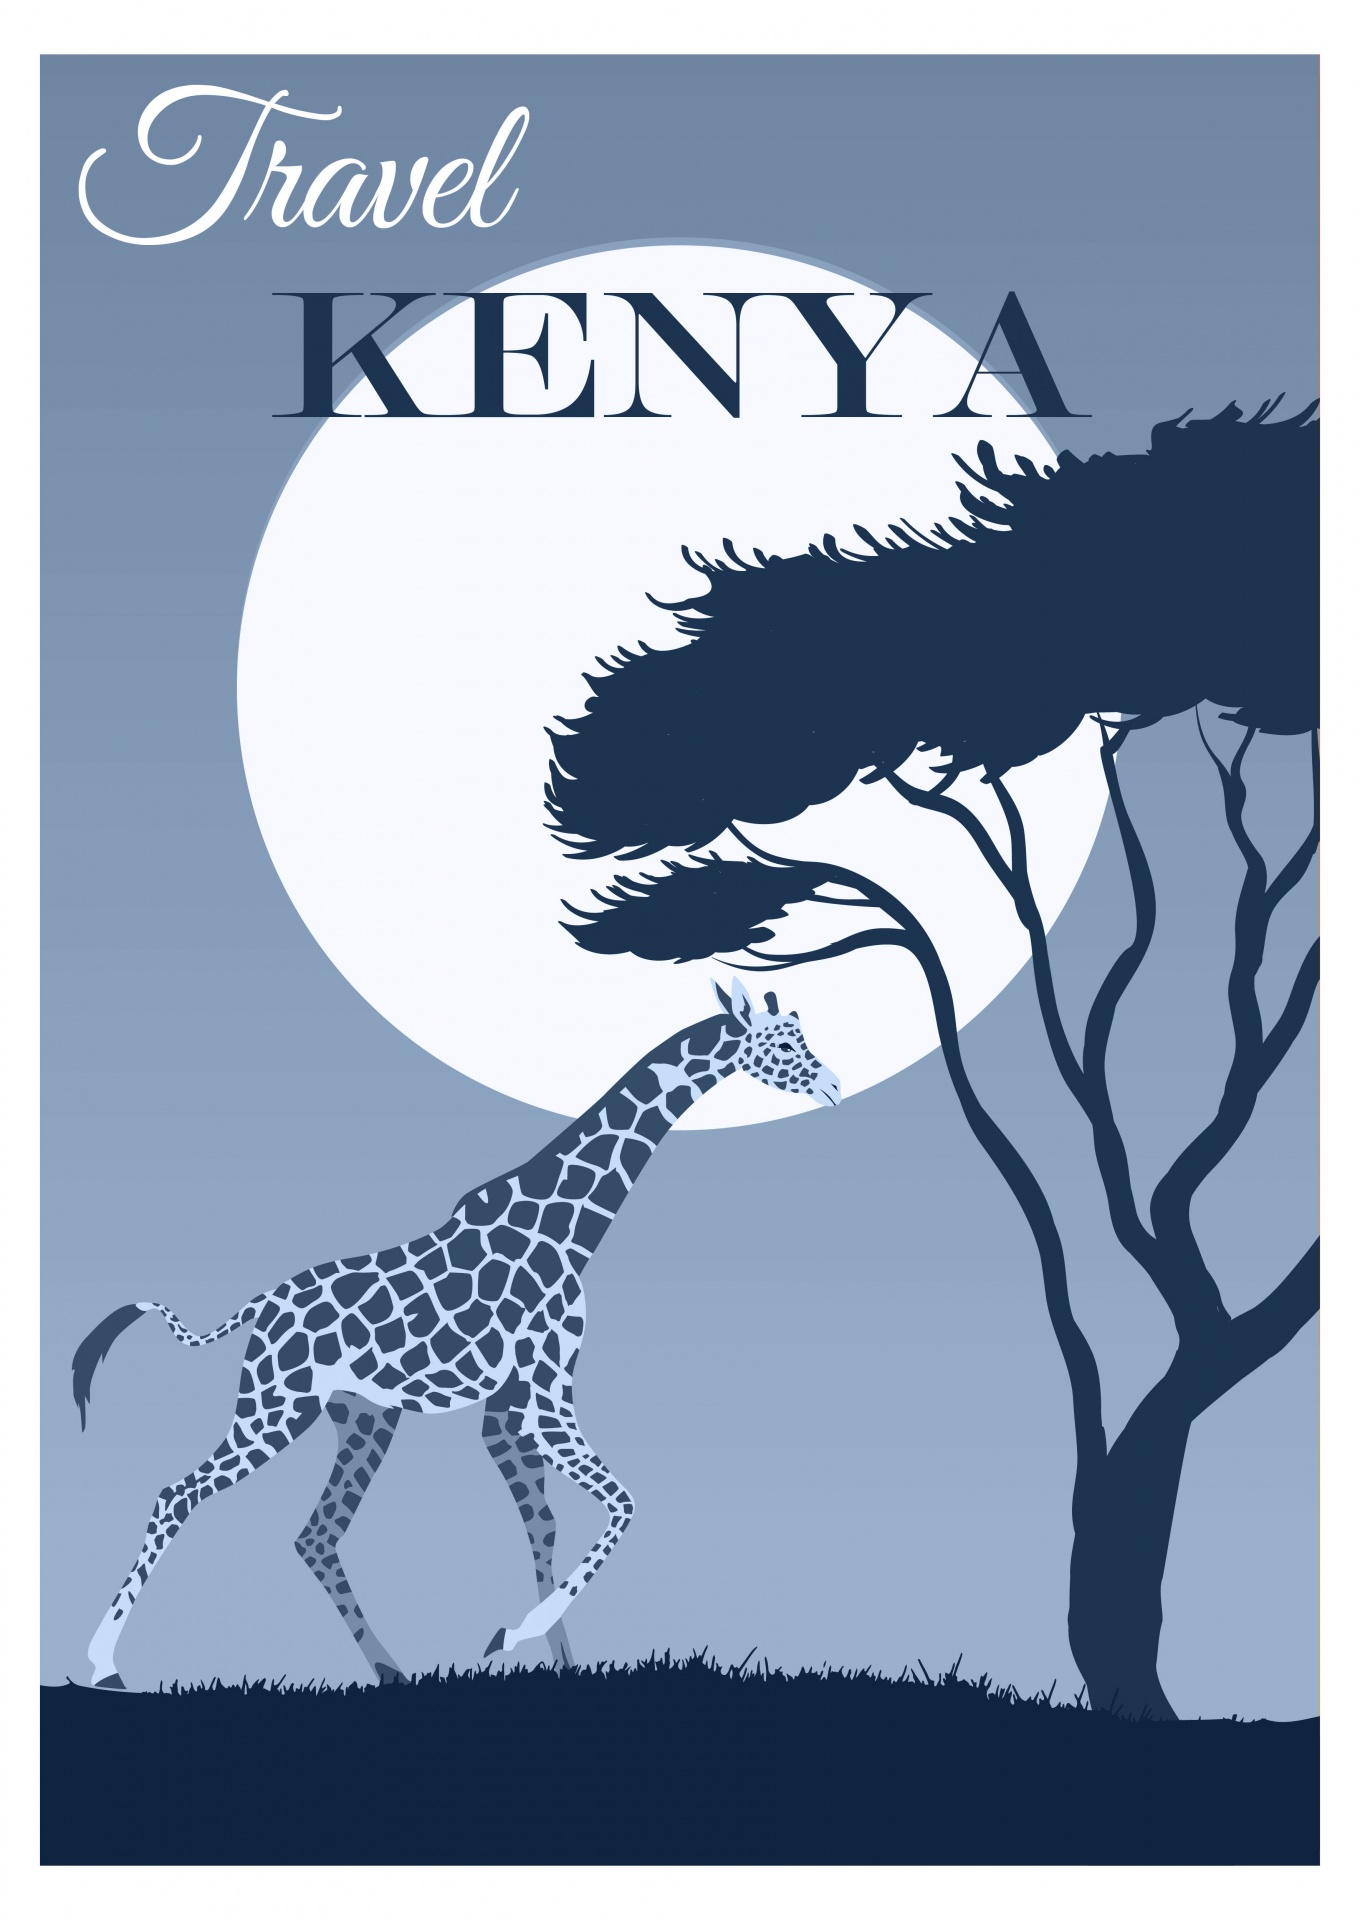 Modern retro, vintage style travel poster for Kenya, Africa with moon, giraffe and acacia tree vector digital illustration